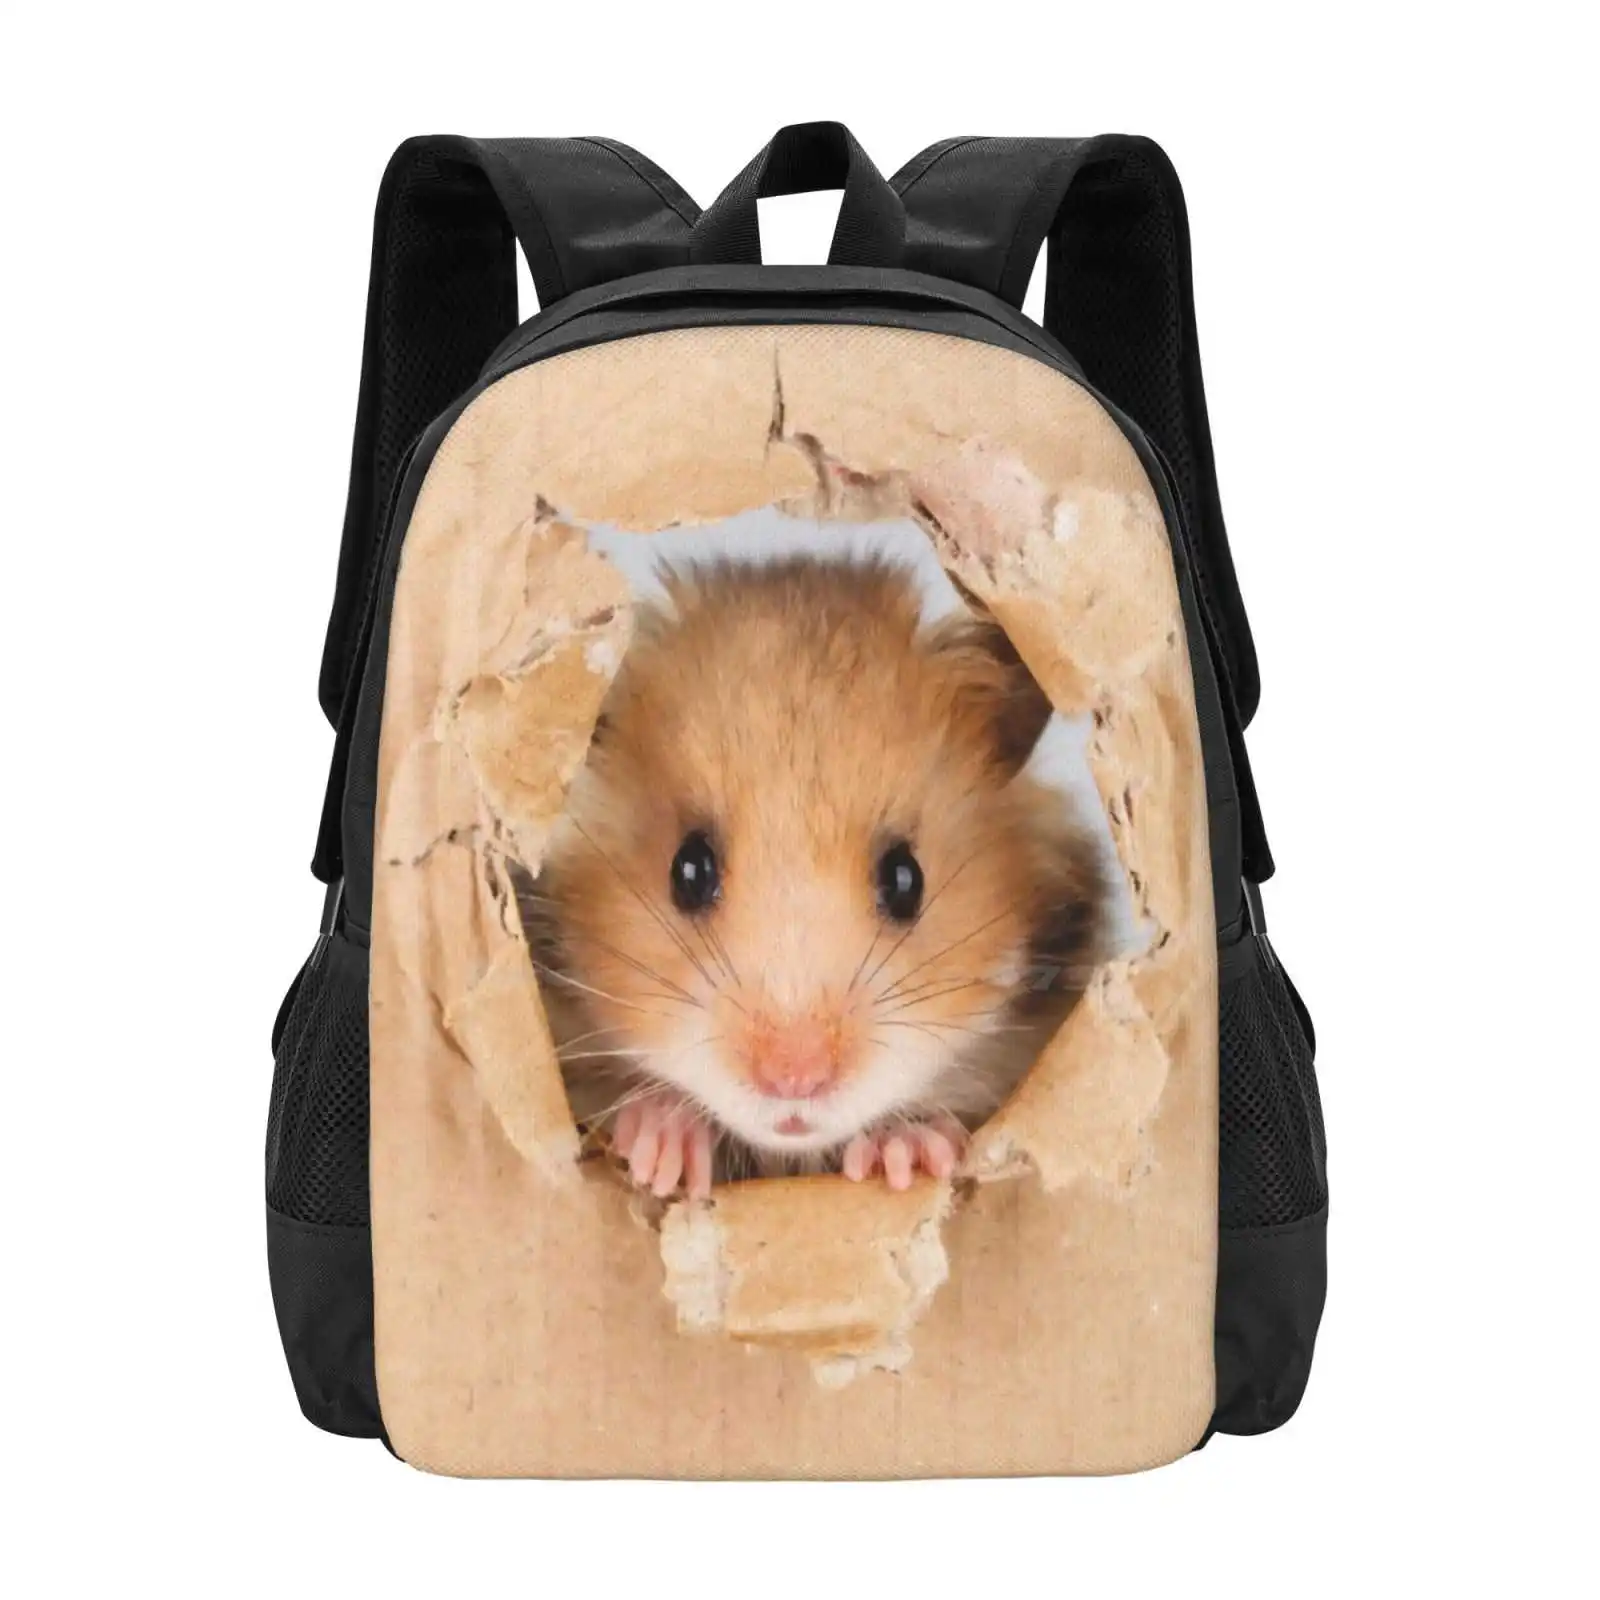 

Cant Breathe-Cute Hamster Peeping Through Hole In Brown Cardboard 3D Print Design Backpack Student Bag Cant Breathe Cute